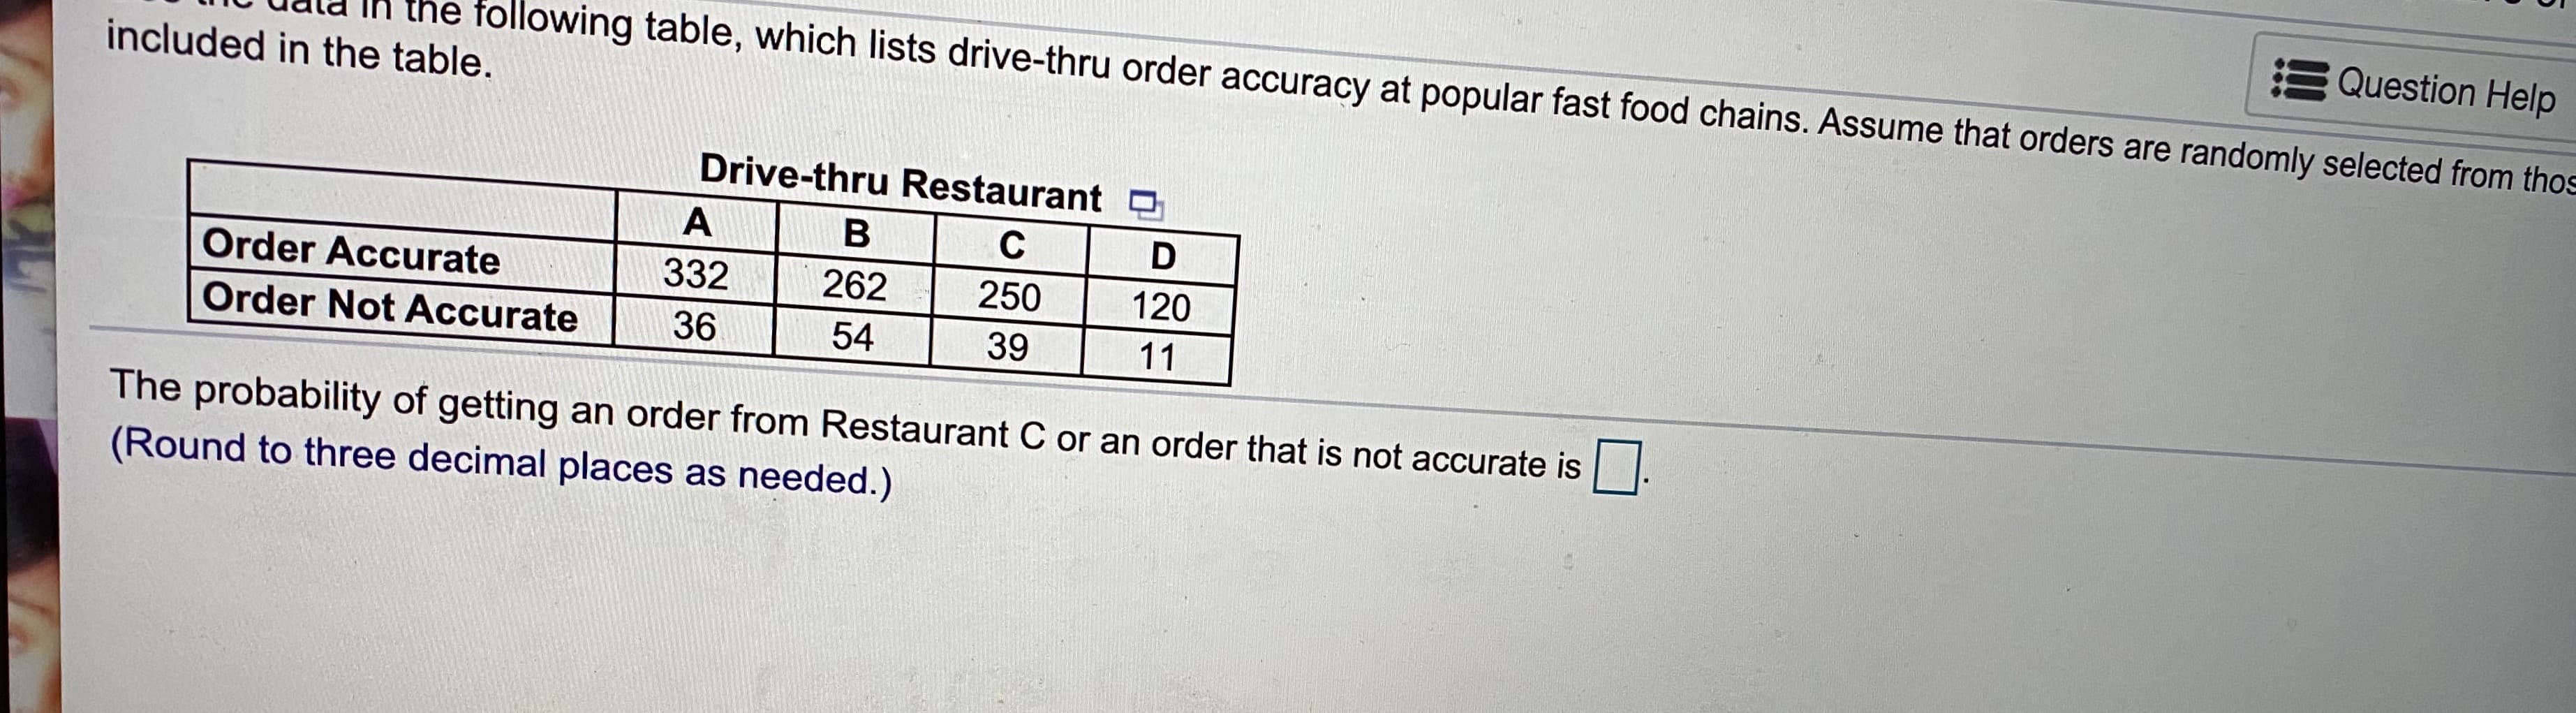 Question Help
lable, which lists drive-thru order accuracy at popular fast food chains. Assume that orders are randomly selected from tho
included in the table.
Drive-thru Restaurant O
A
В
C
Order Accurate
332
262
250
120
Order Not Accurate
36
54
39
11
The probability of getting an order from Restaurant C or an order that is not accurate is.
(Round to three decimal places as needed.)
